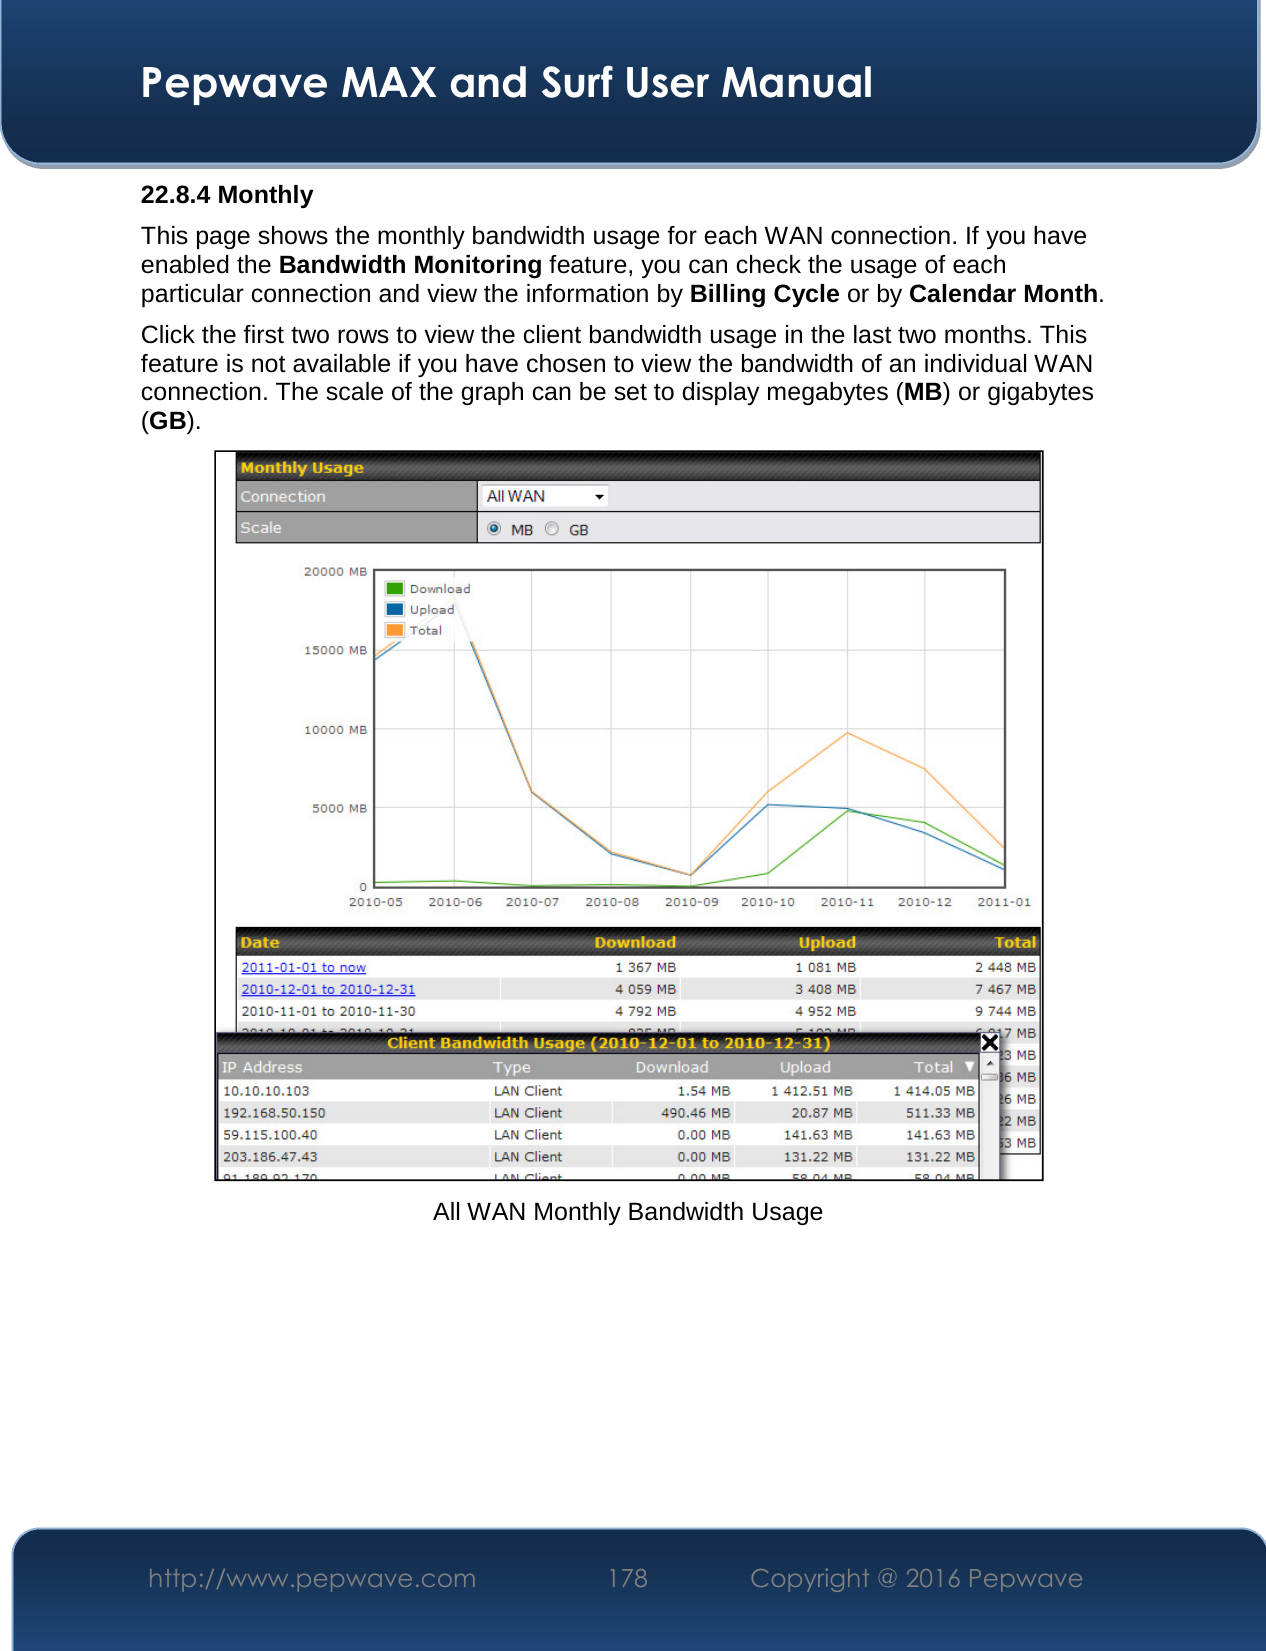  Pepwave MAX and Surf User Manual http://www.pepwave.com  178    Copyright @ 2016 Pepwave   22.8.4 Monthly This page shows the monthly bandwidth usage for each WAN connection. If you have enabled the Bandwidth Monitoring feature, you can check the usage of each particular connection and view the information by Billing Cycle or by Calendar Month. Click the first two rows to view the client bandwidth usage in the last two months. This feature is not available if you have chosen to view the bandwidth of an individual WAN connection. The scale of the graph can be set to display megabytes (MB) or gigabytes (GB).  All WAN Monthly Bandwidth Usage 